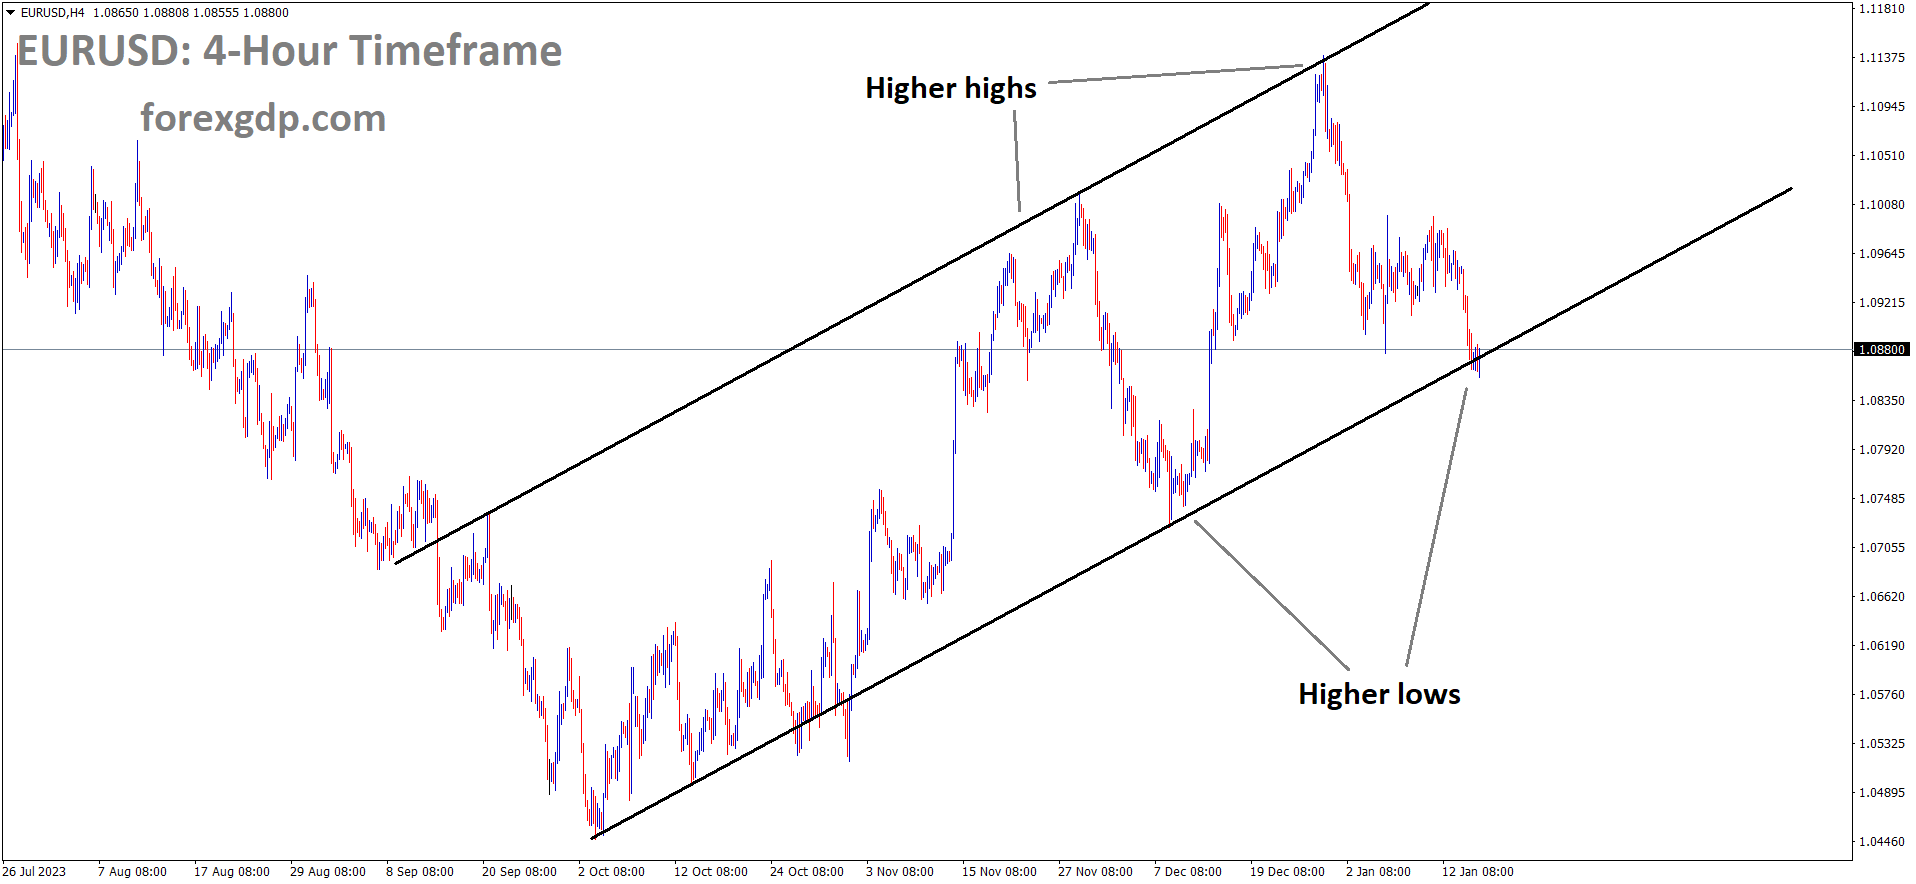 EURUSD is moving in an Ascending channel and the market has reached the higher low area of the channel 1